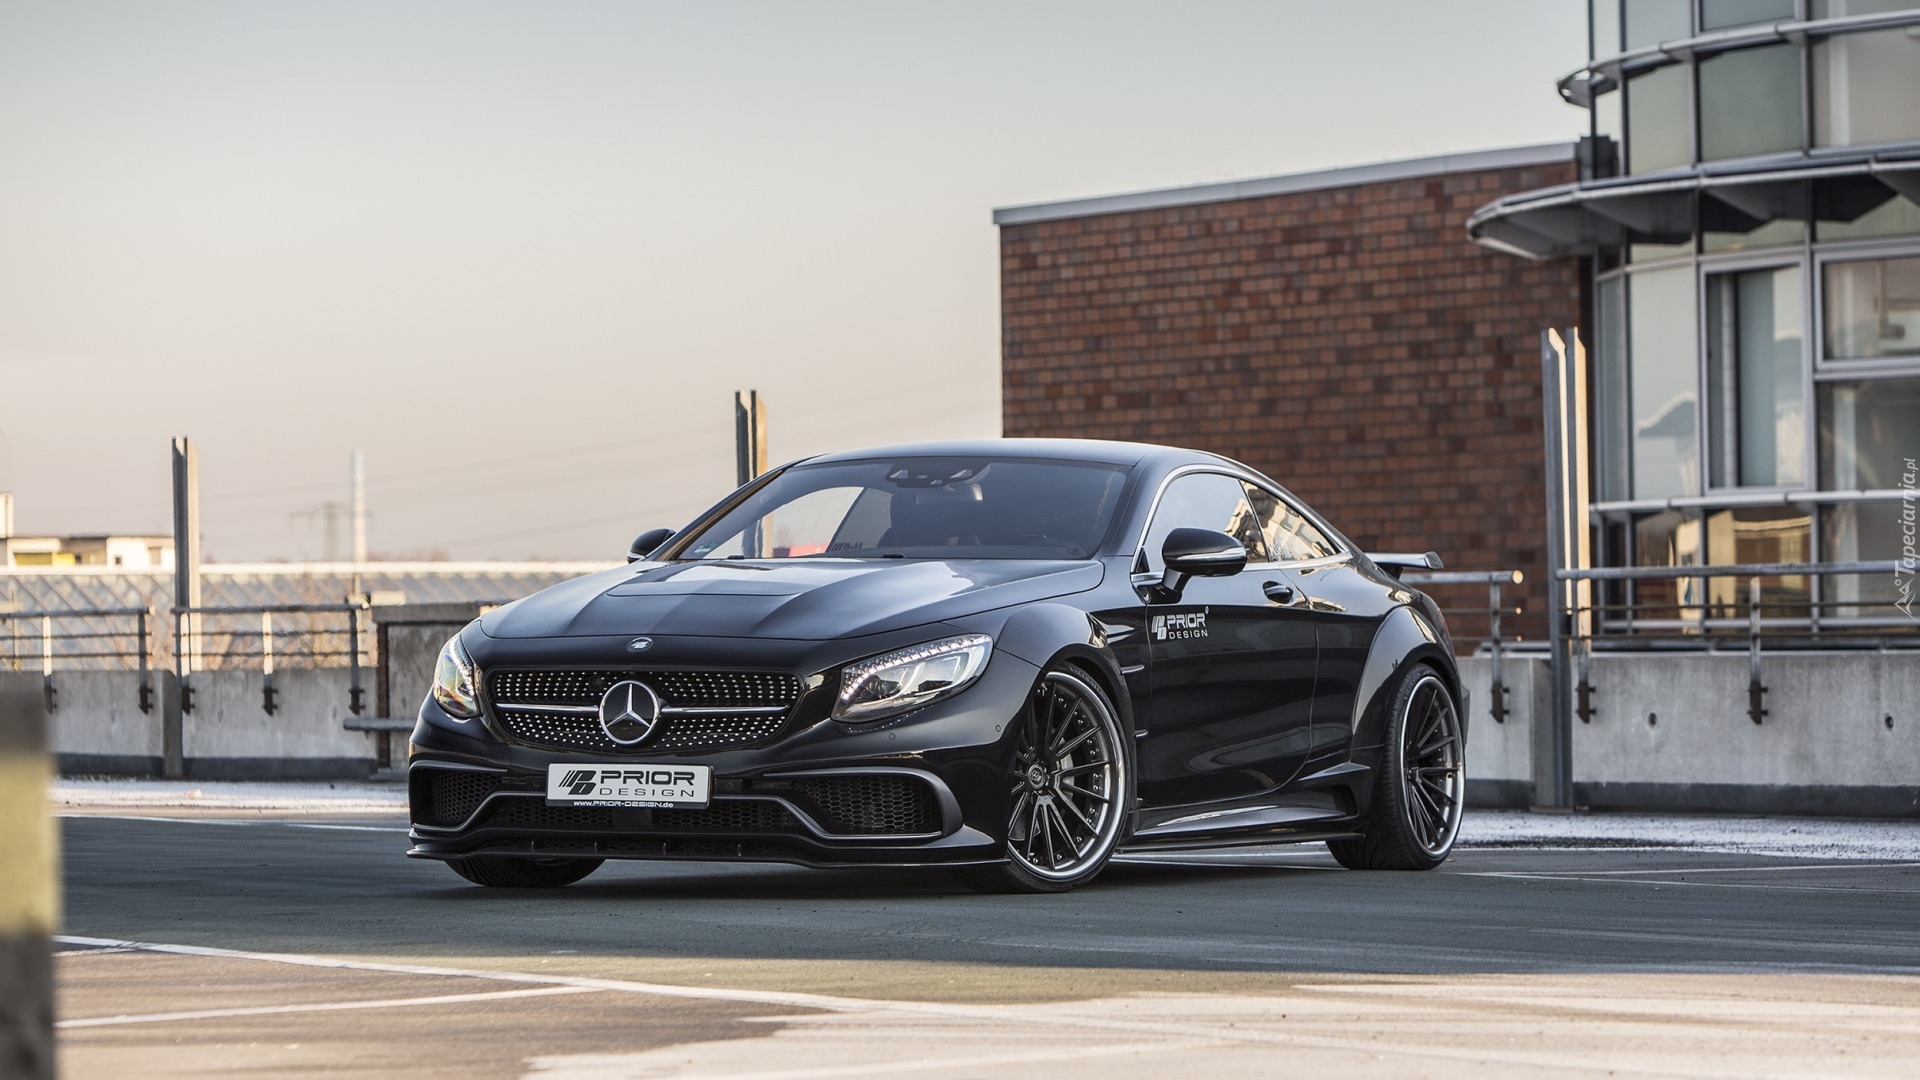 Mercedes-Benz S65 AMG Coupe, Tuning by Prior Design, 2016